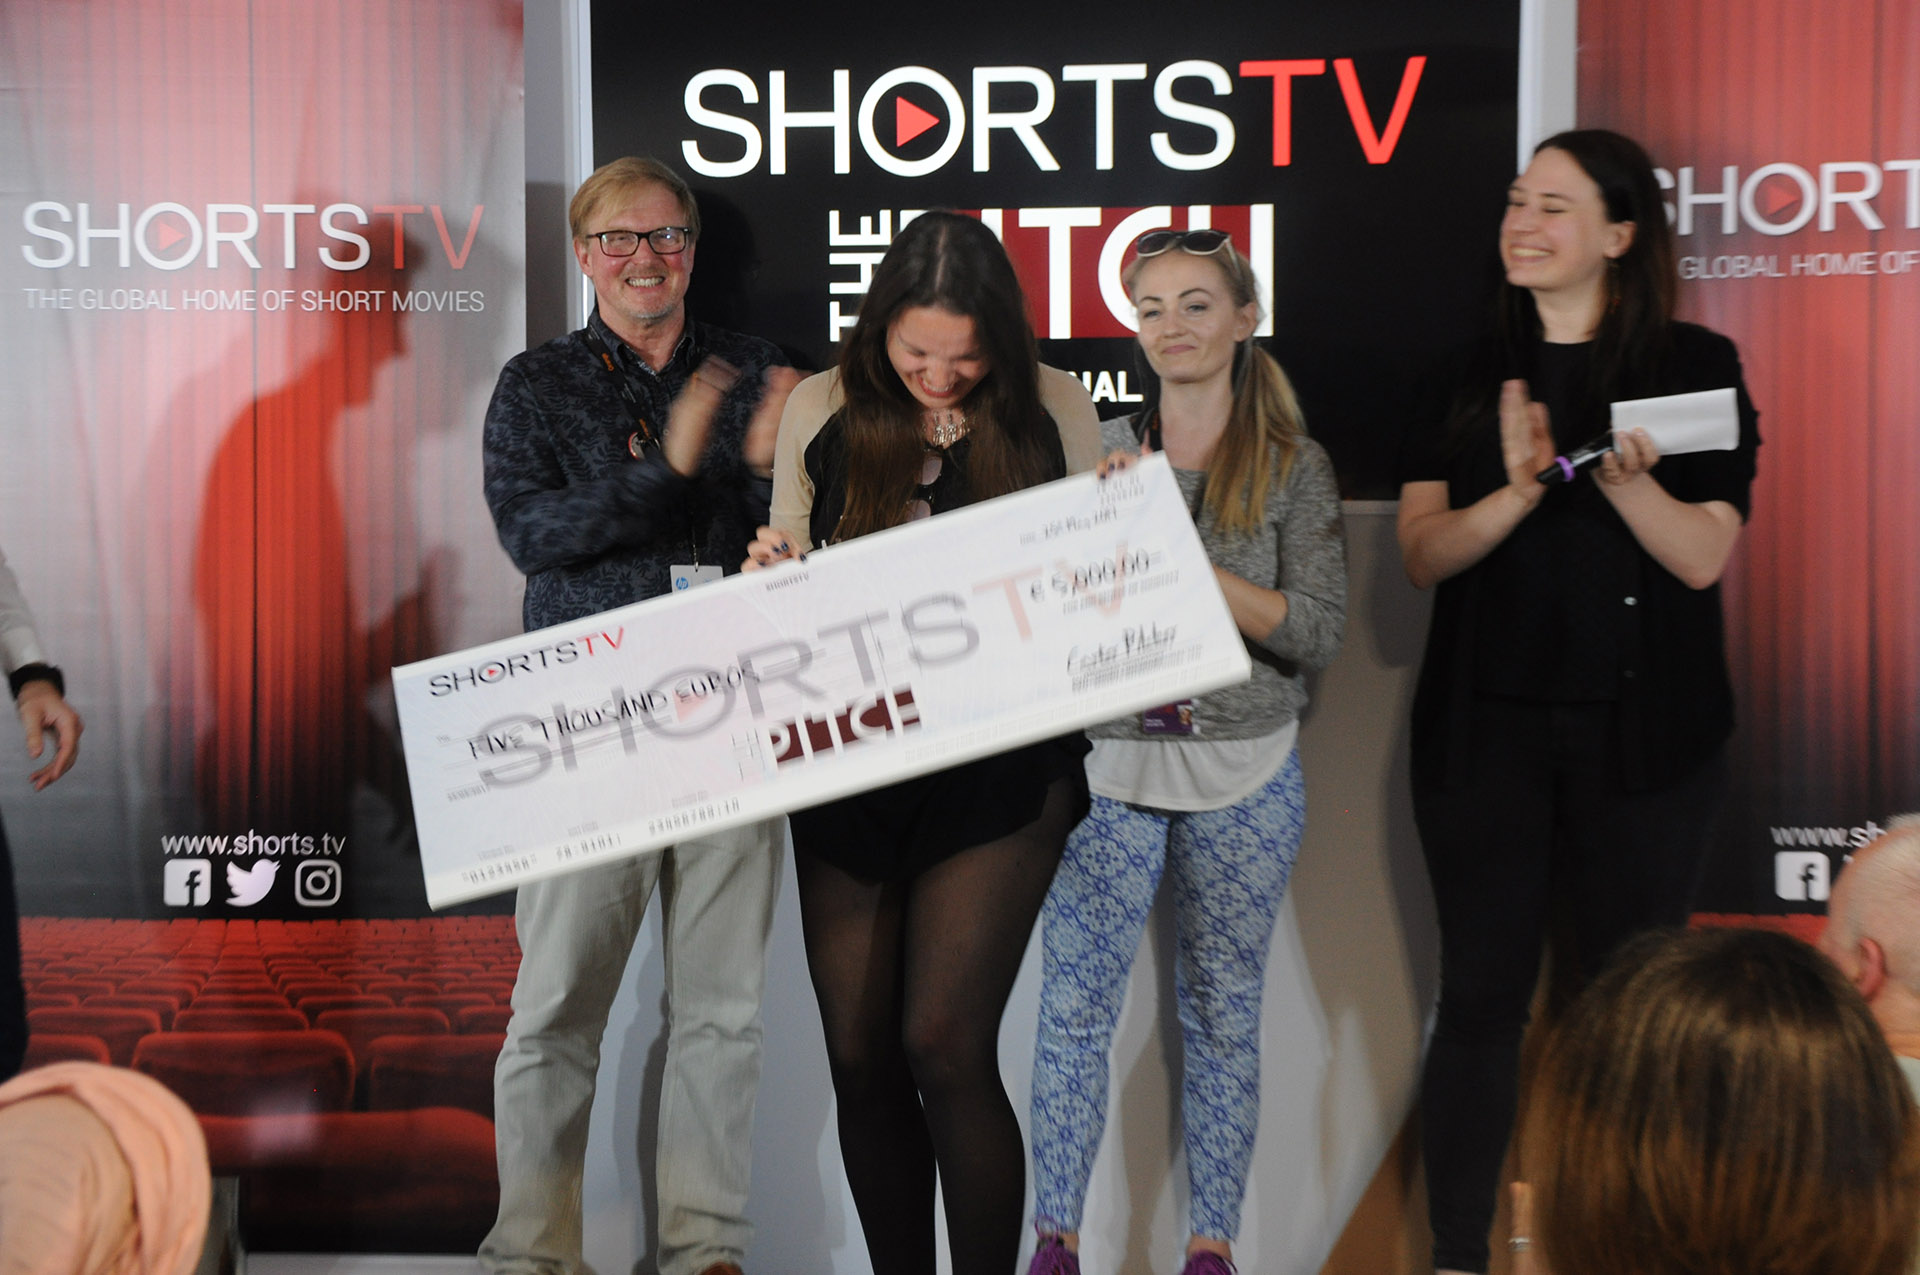 The jury award Kyla Simon Bruce with her cheque for 5000 Euros!